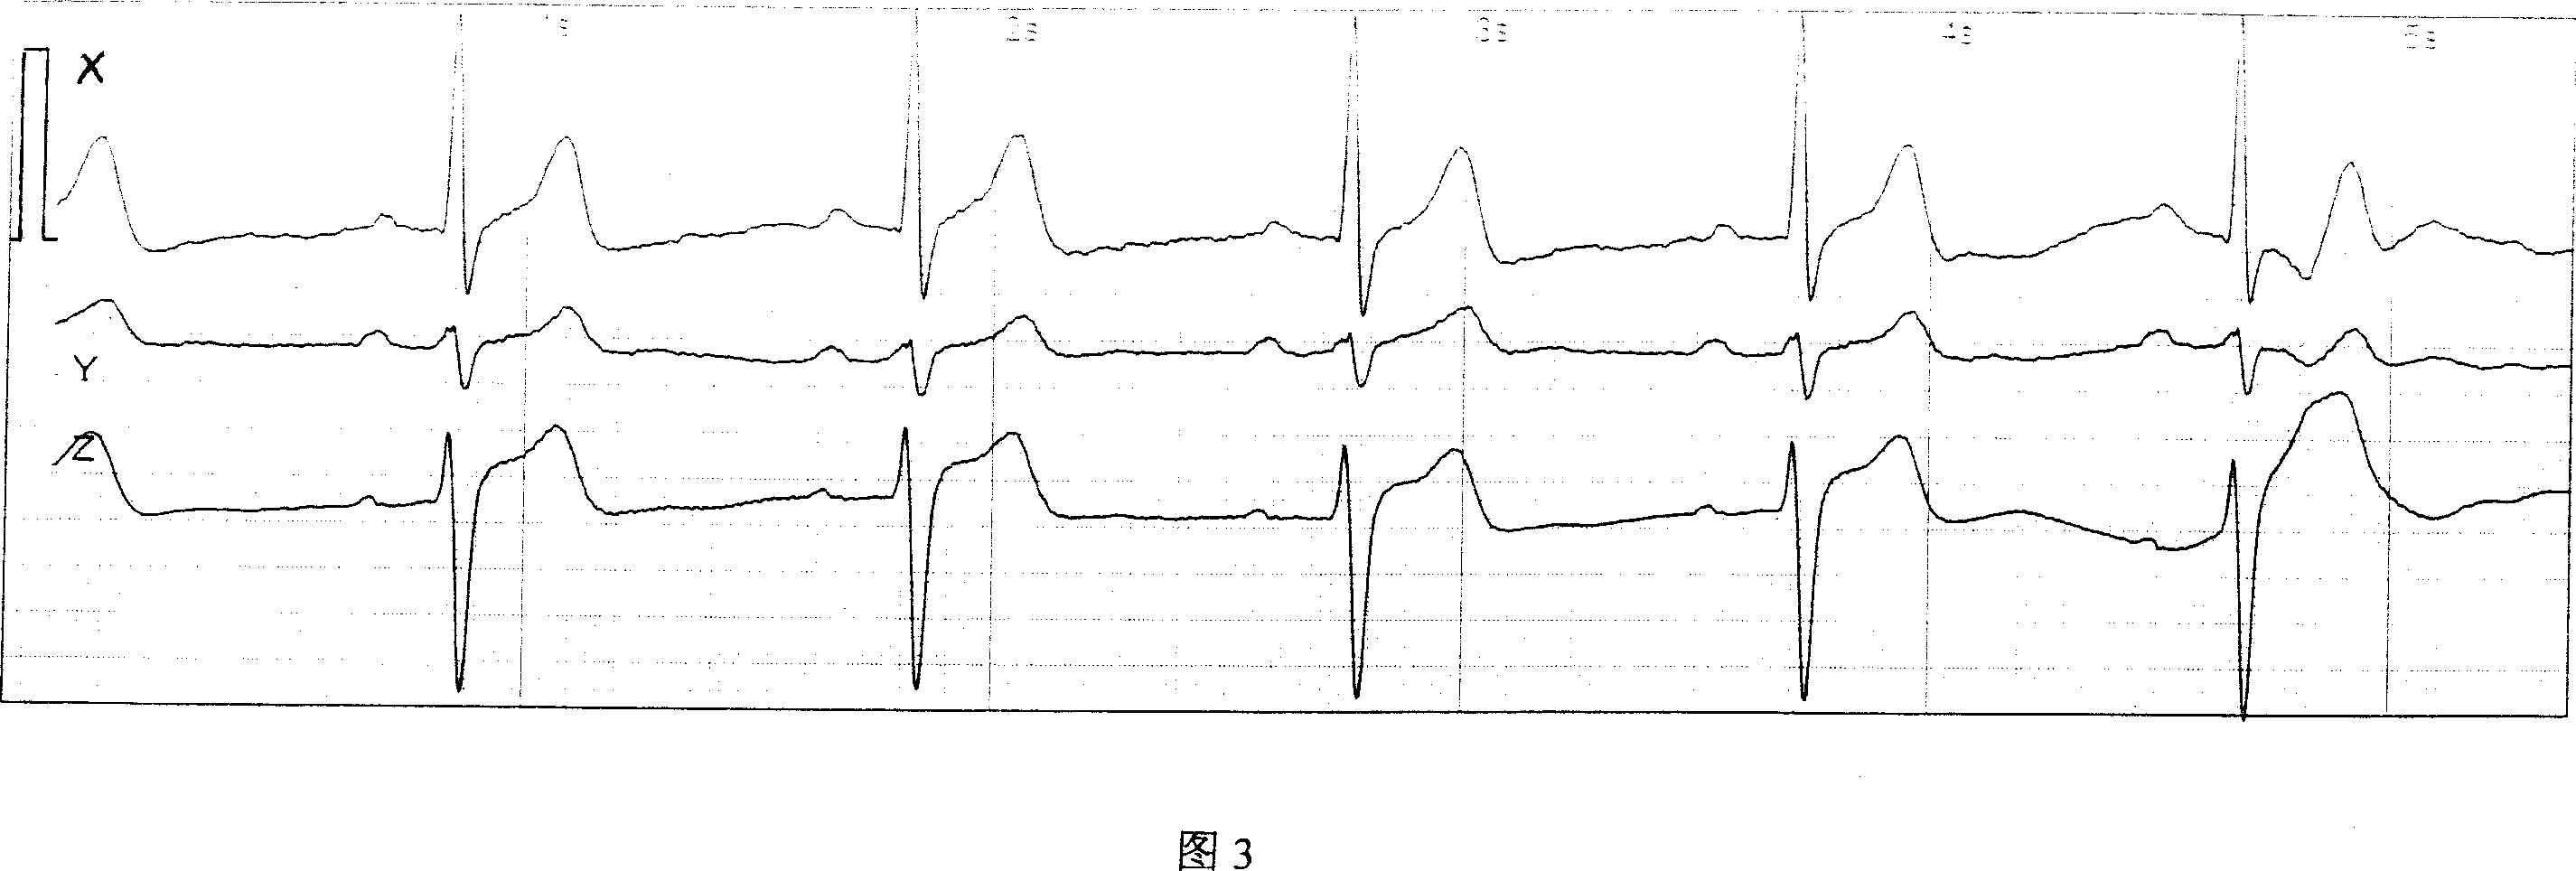 Electrocardiograph with three-dimensional image and method for implementing same